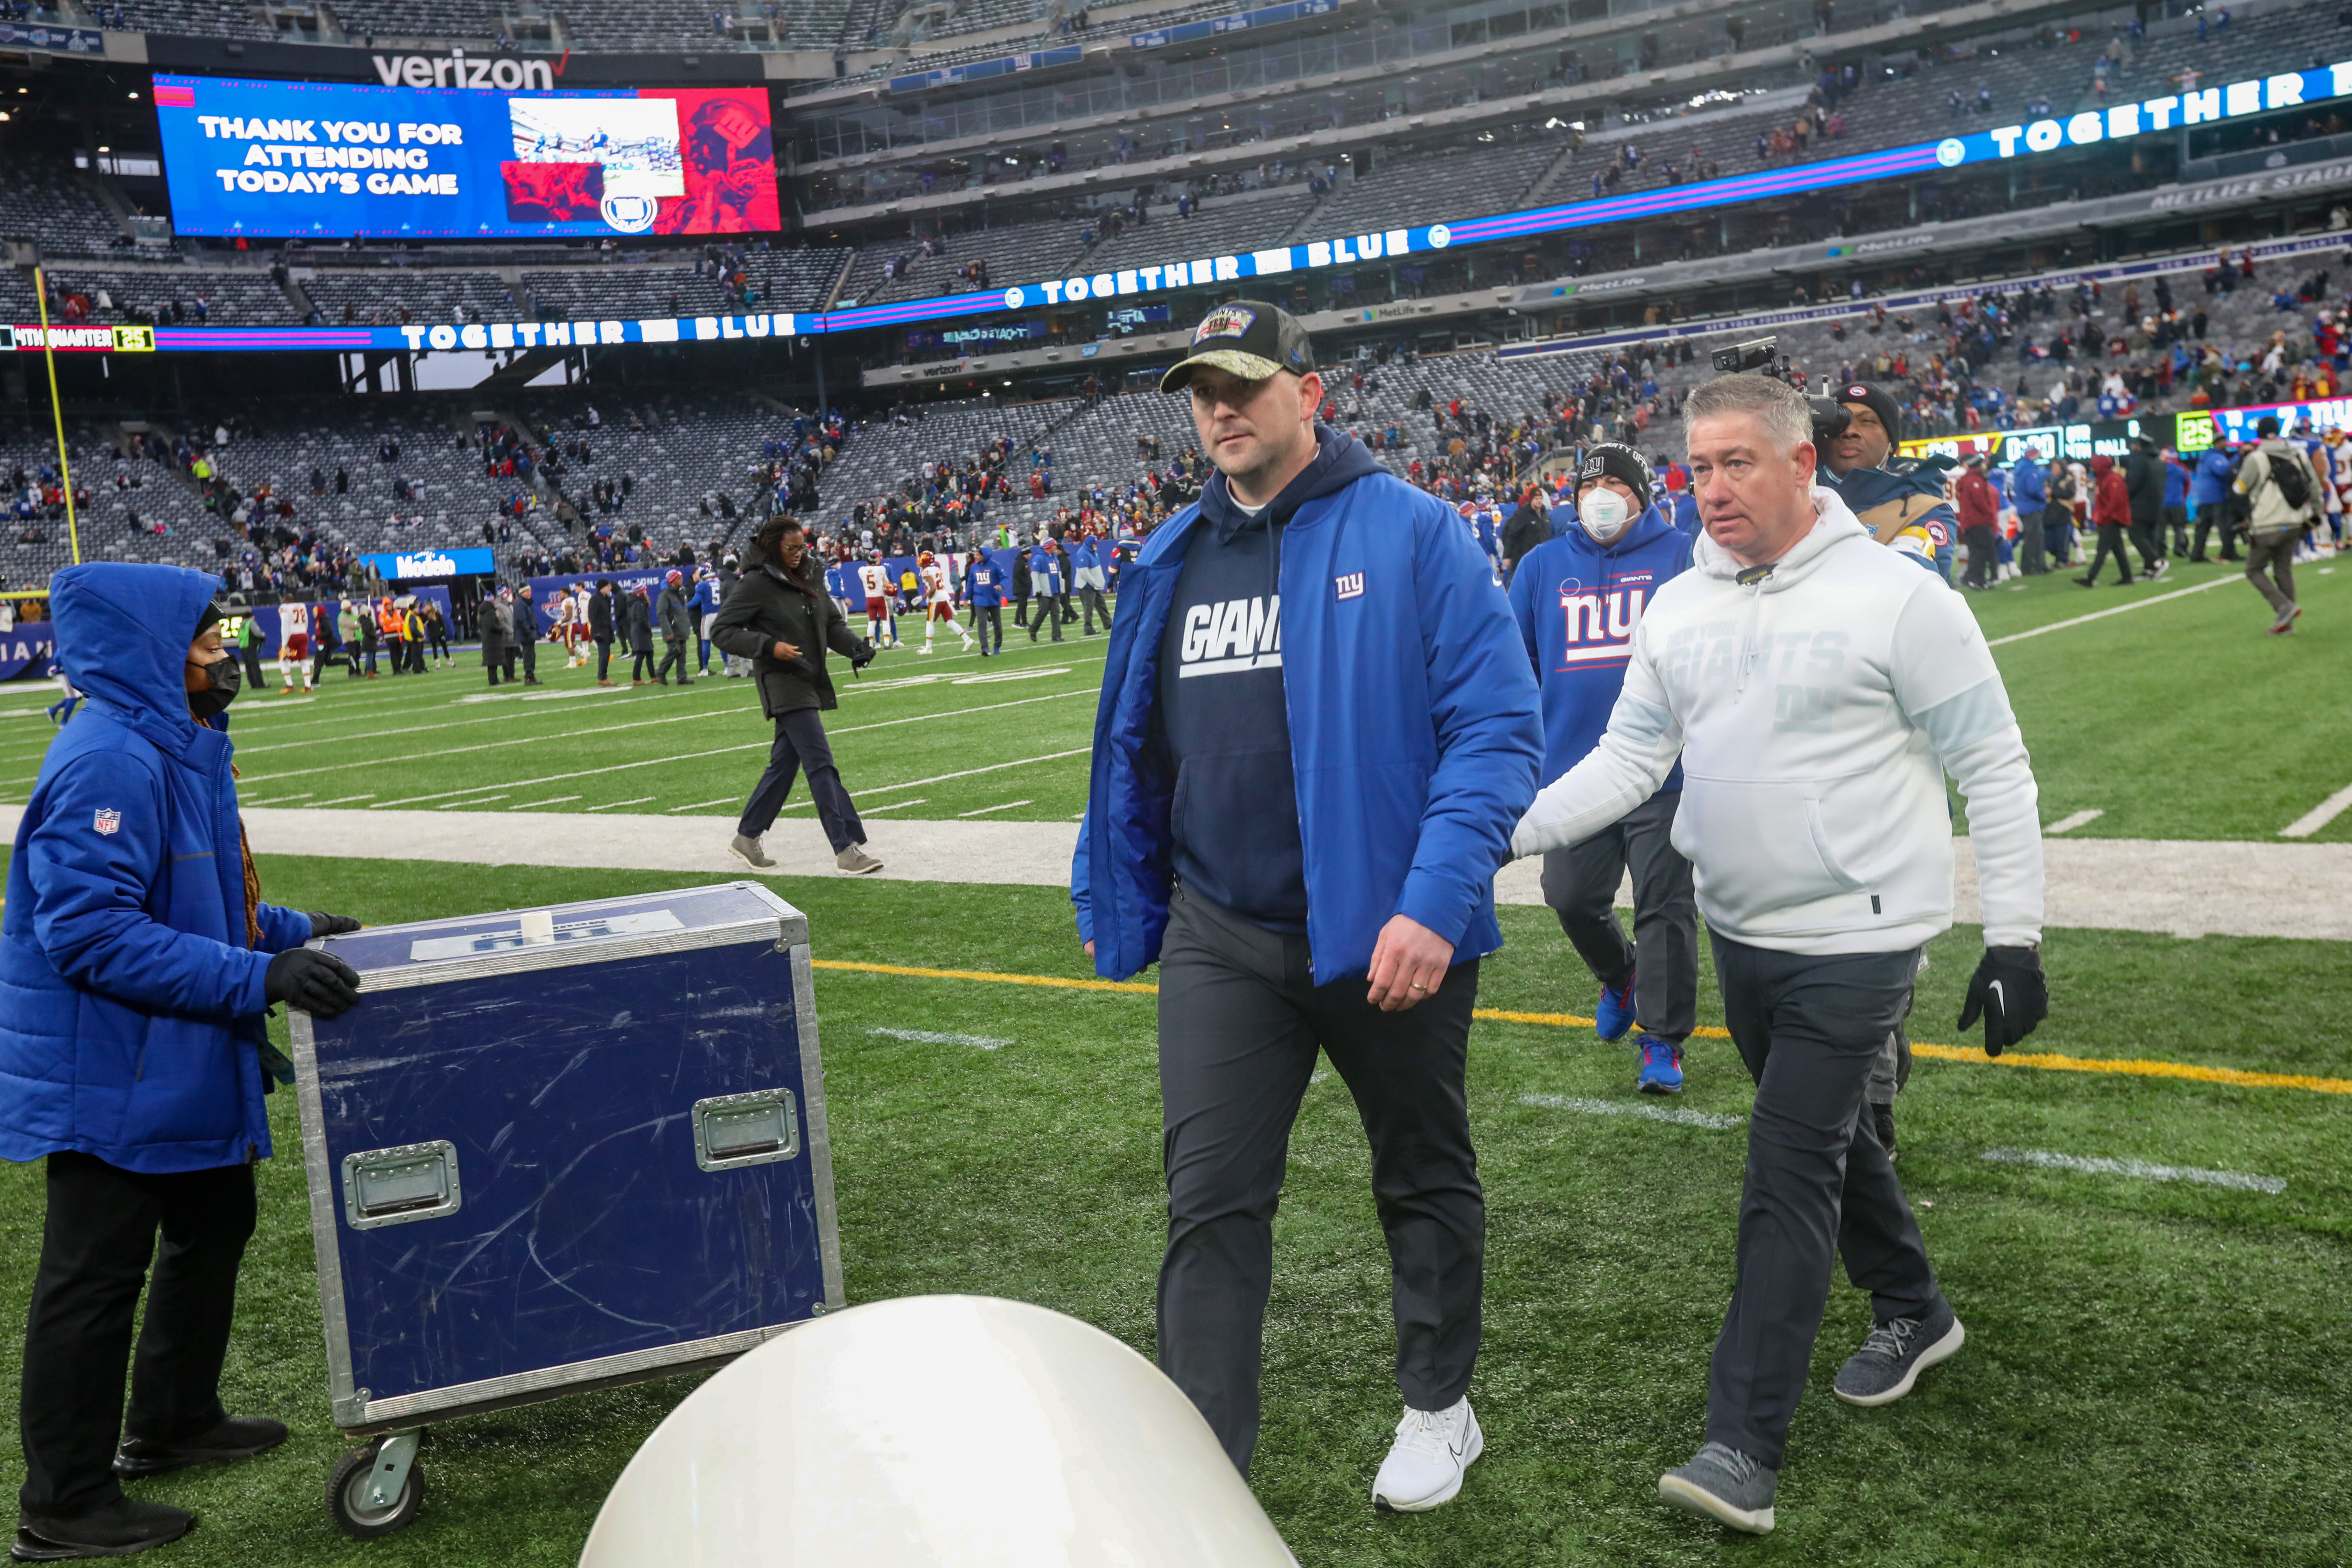 New York Giants head coach Joe Judge (center) walks off after the Giants lost to the Washington Football Team, 22-7, on Sunday, Jan. 9, 2022 in East Rutherford, N.J.